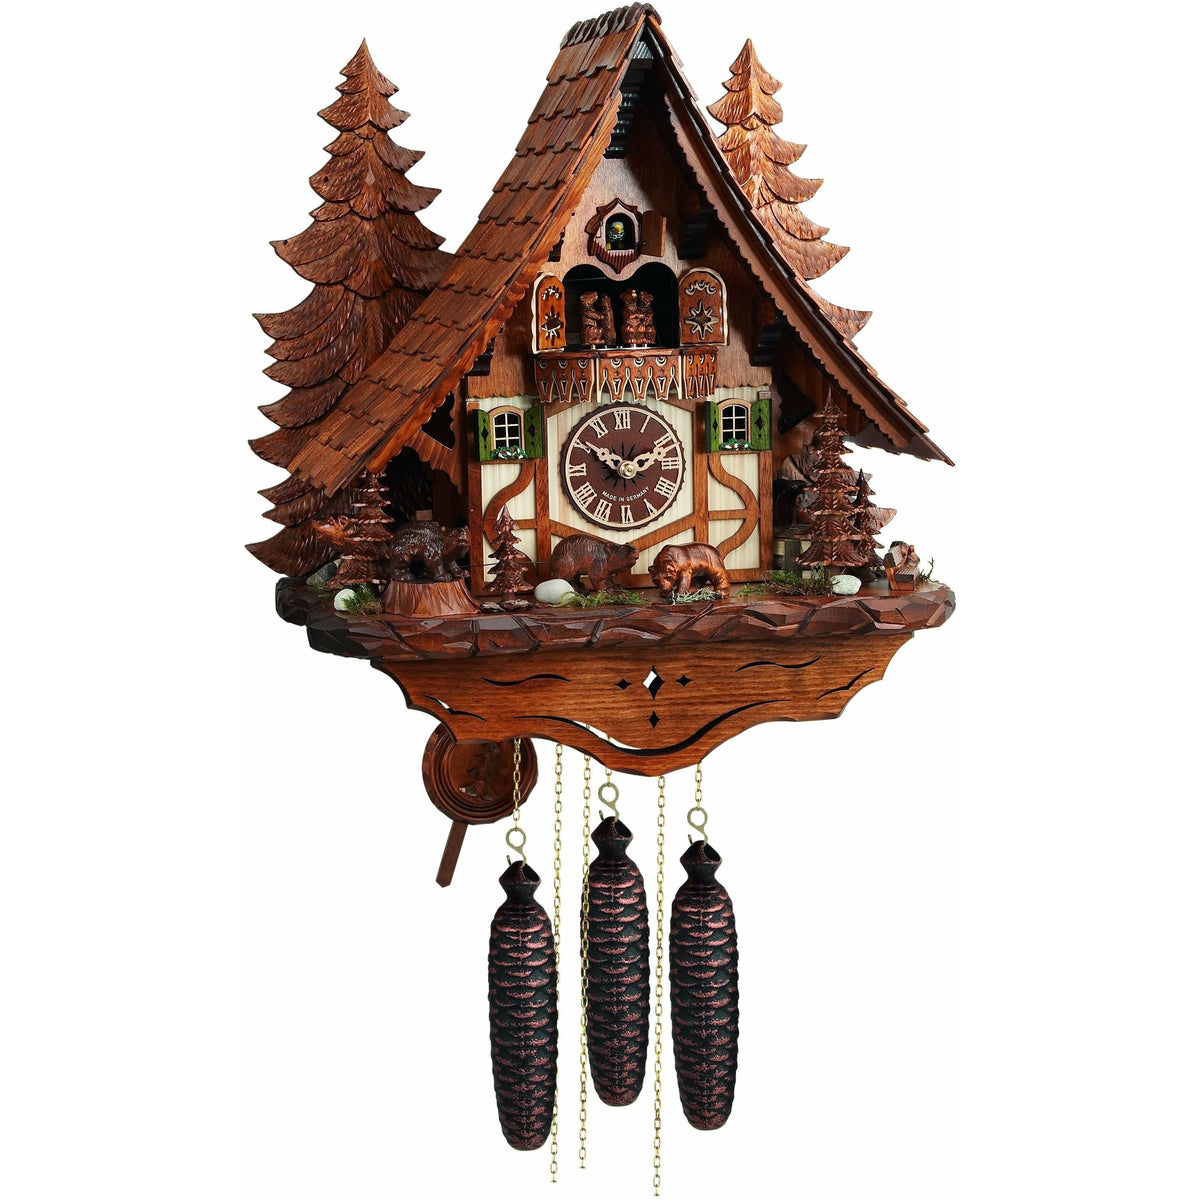 Engstler Cuckoo Clock 498-8 MT - Time for a Clock